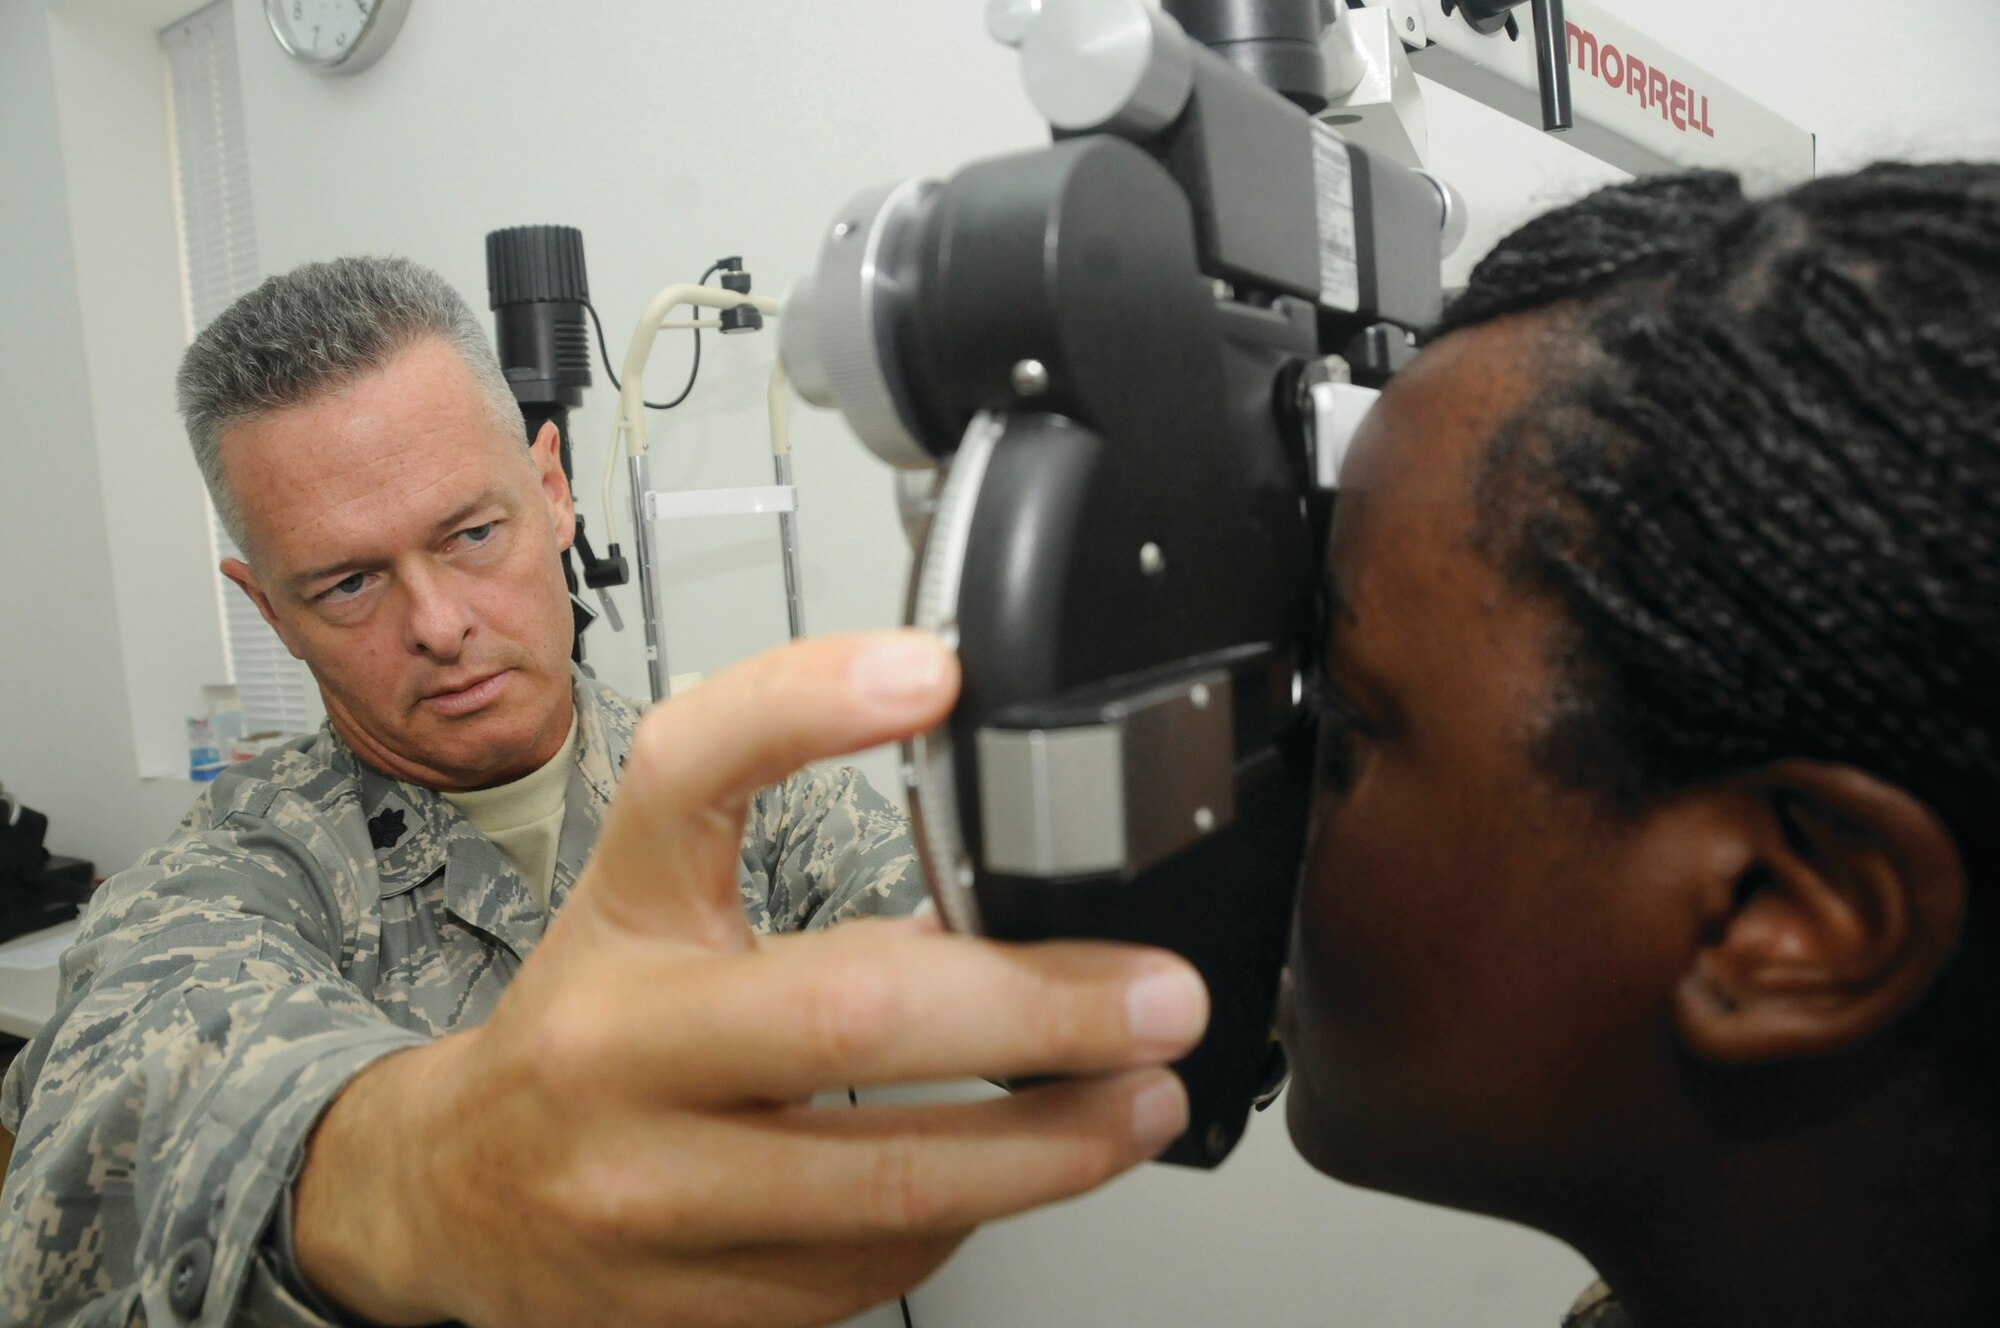 Colonel Collins changes the trial lenses on a phoropter to determine the eye glass and contact prescriptions for Airman Simmons here Oct. 14. The optometry clinic is the first of its kind in Southwest Asia and provides eye care for more than 8,000 U.S. servicemembers deployed here. (U.S. Air Force photo by Staff Sgt. Darnell T. Cannady)